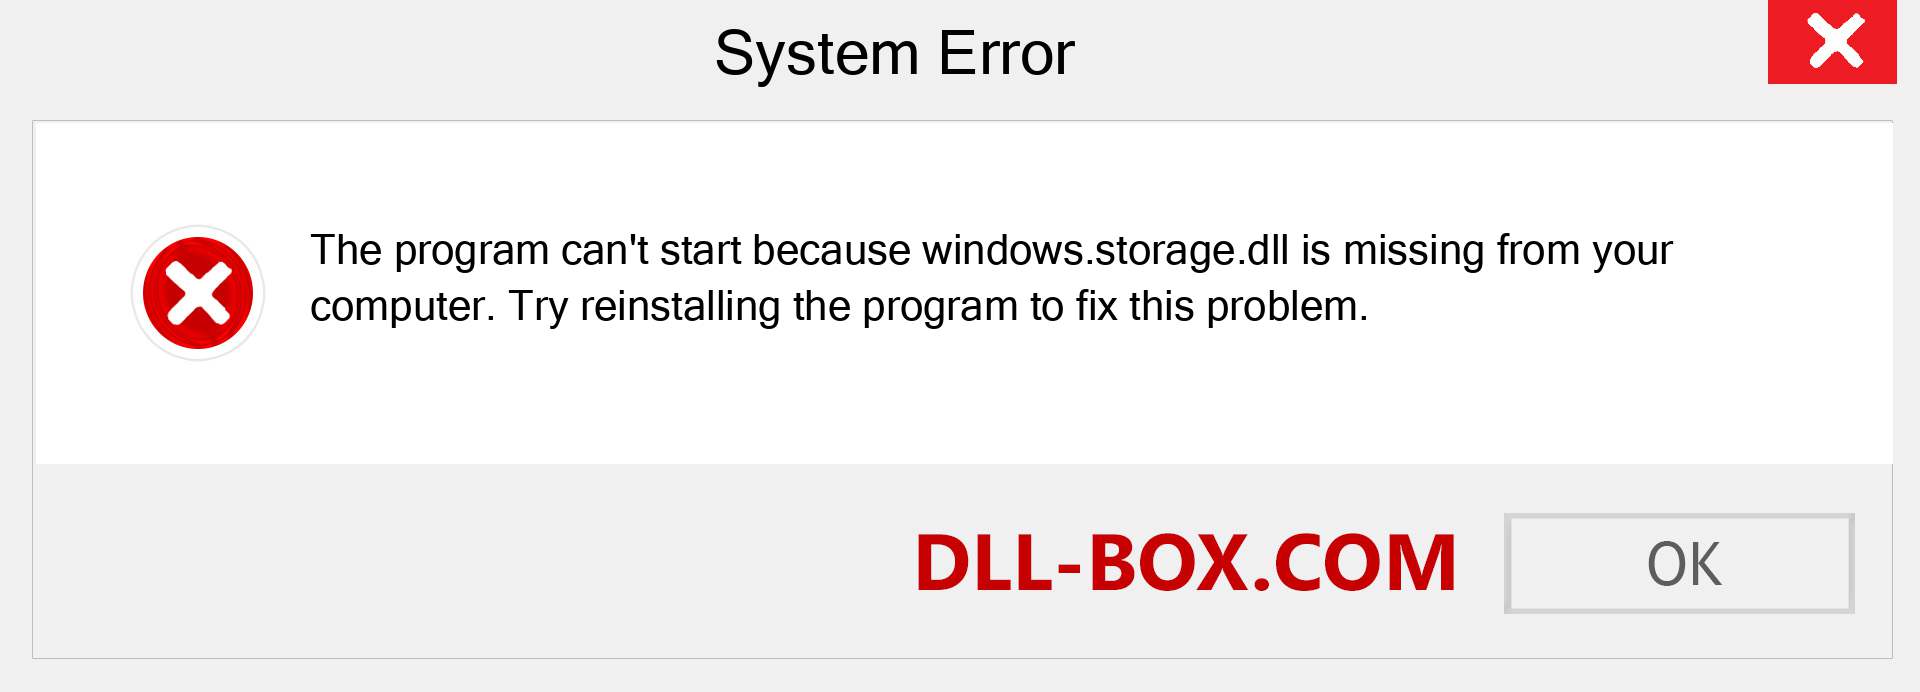  windows.storage.dll file is missing?. Download for Windows 7, 8, 10 - Fix  windows.storage dll Missing Error on Windows, photos, images